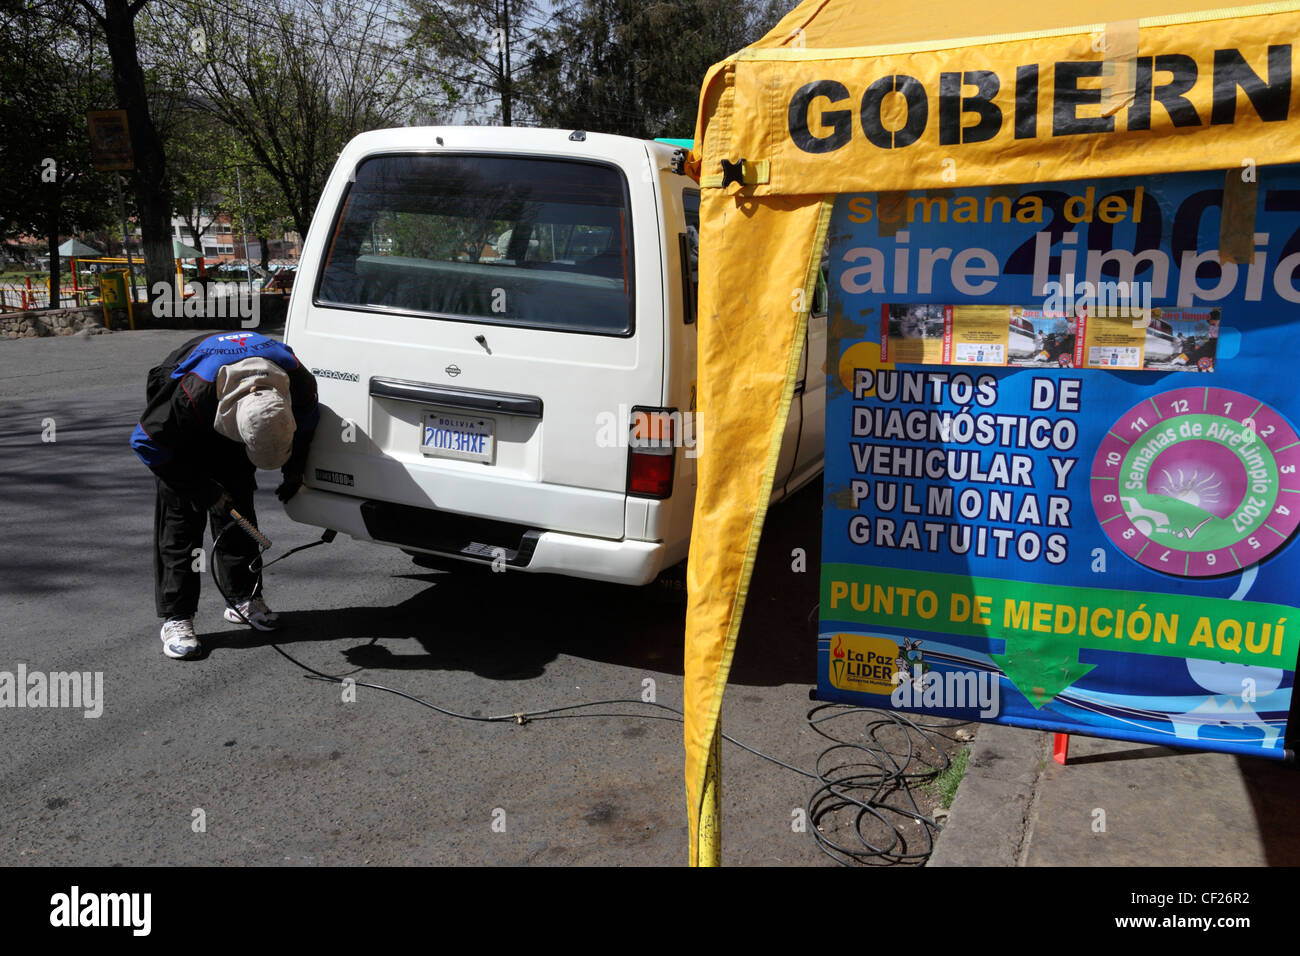 A mechanic tests exhaust emissions from a minibus during Clean Air Week (a campaign to reduce air pollution), La Paz, Bolivia Stock Photo